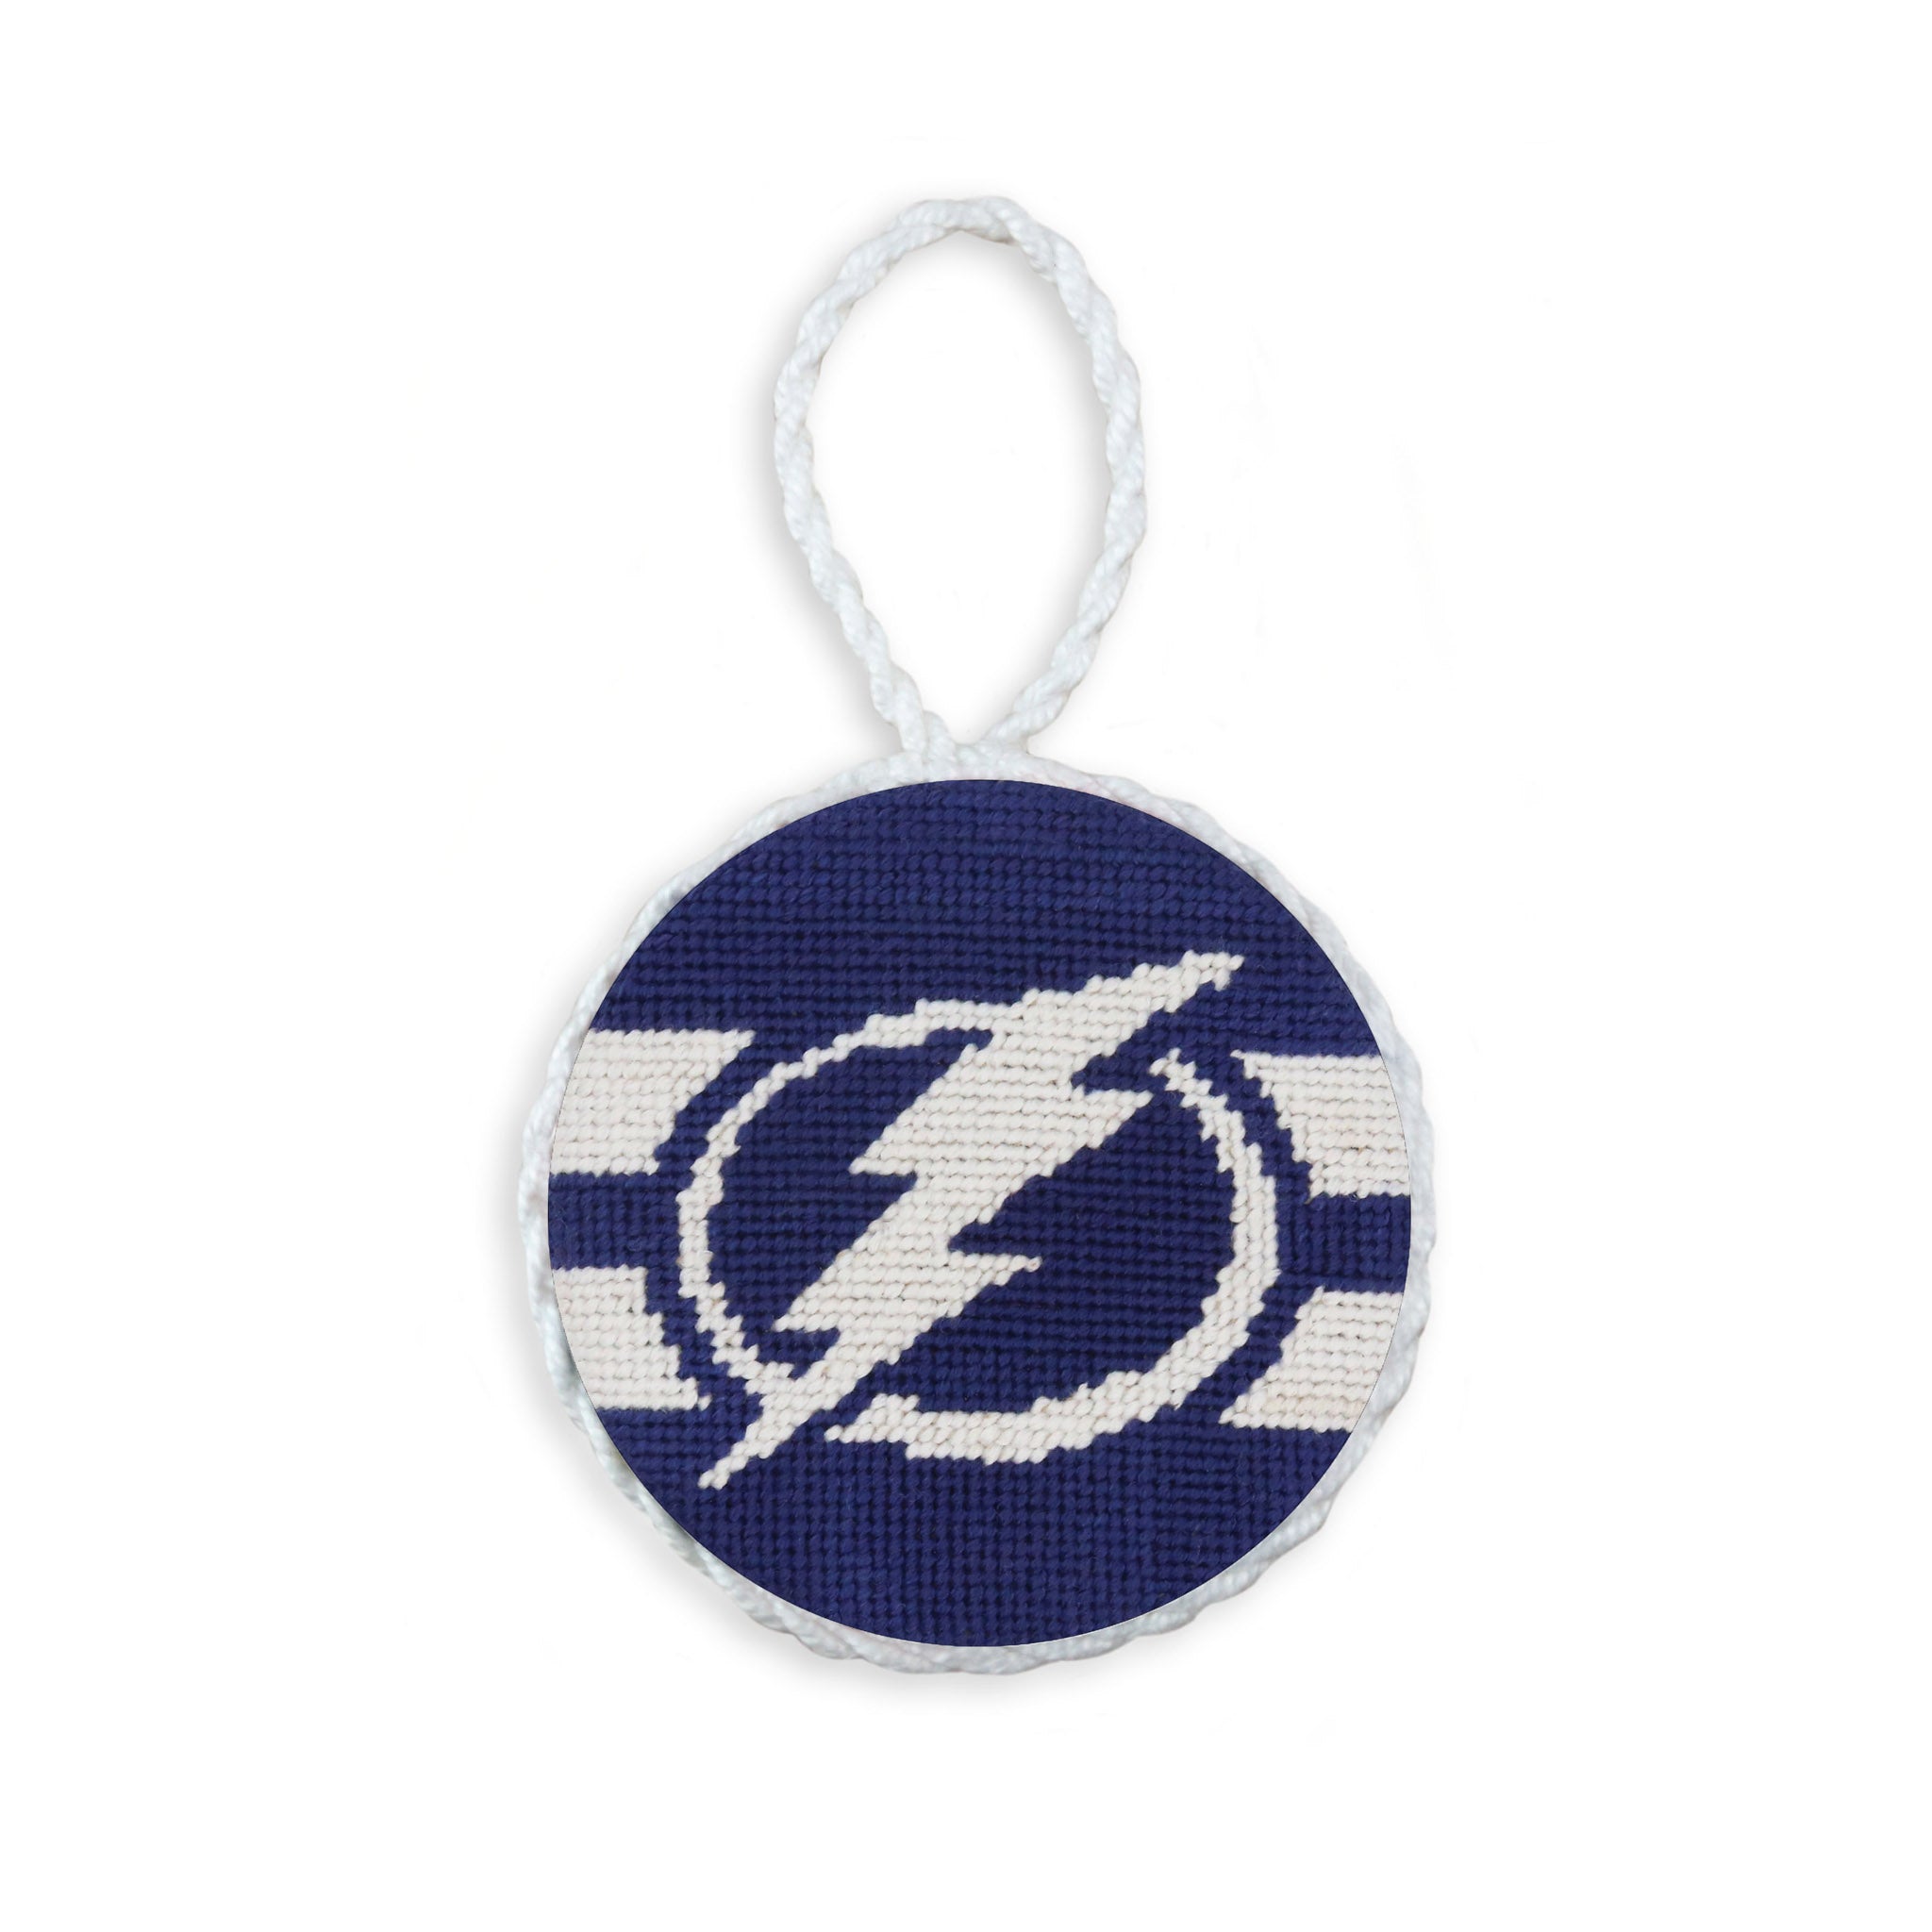 Smathers and Branson Tampa Bay Lightning Needlepoint Ornament Classic Navy - Jersey Stripes White Cord  